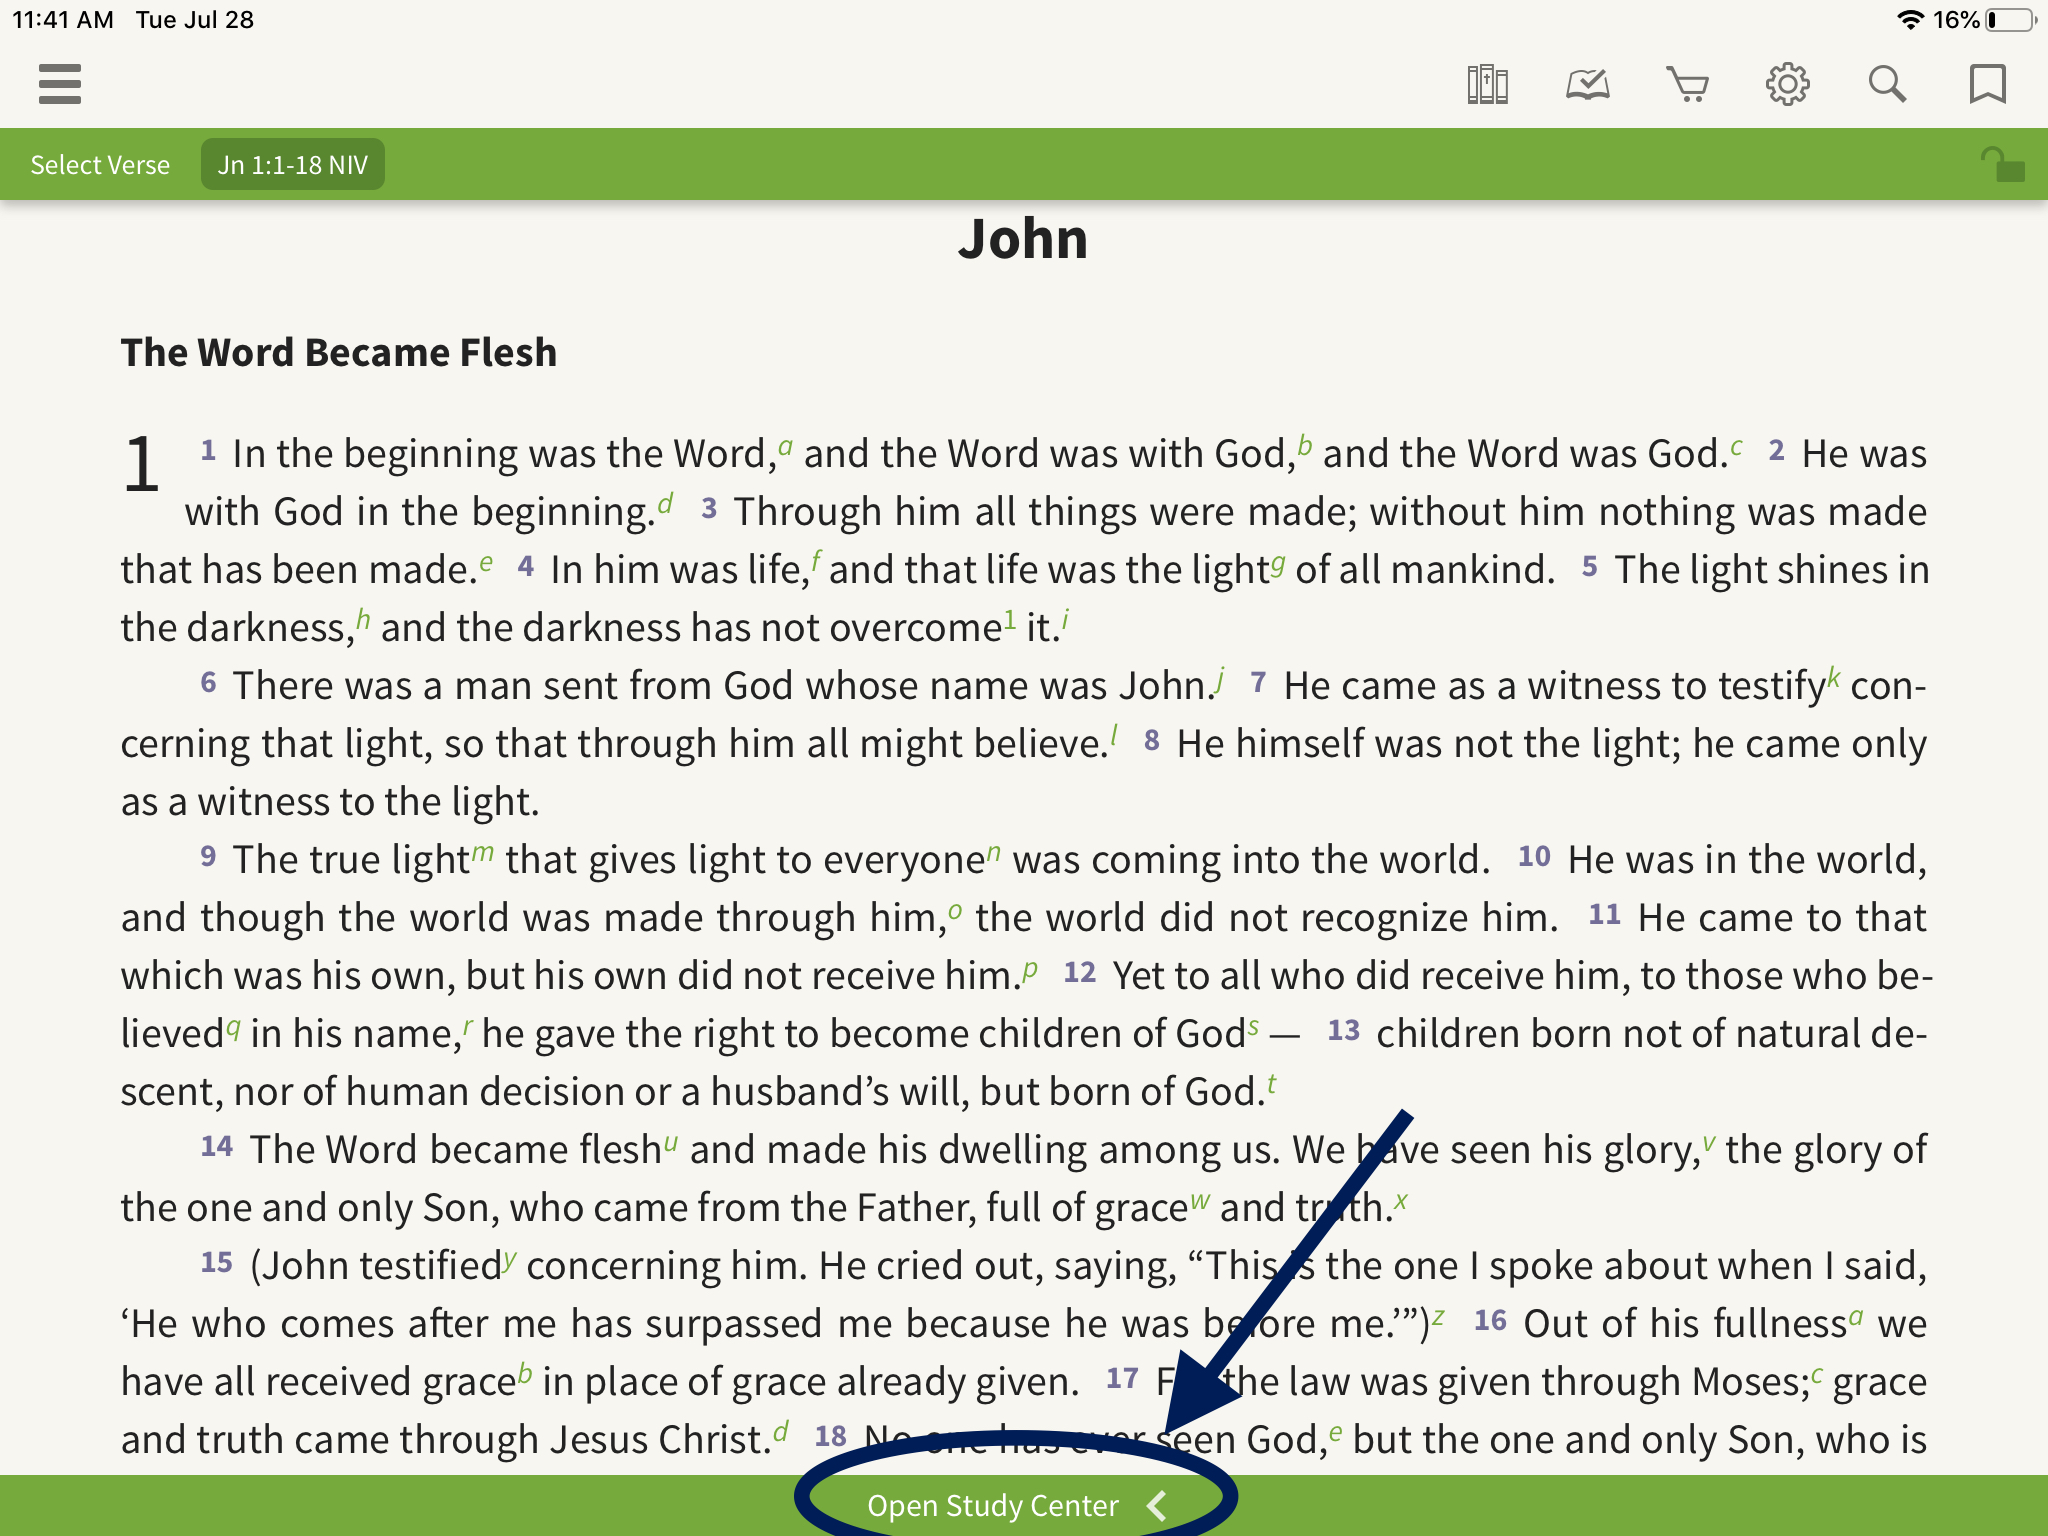 how to open the study center in the olive tree bible app